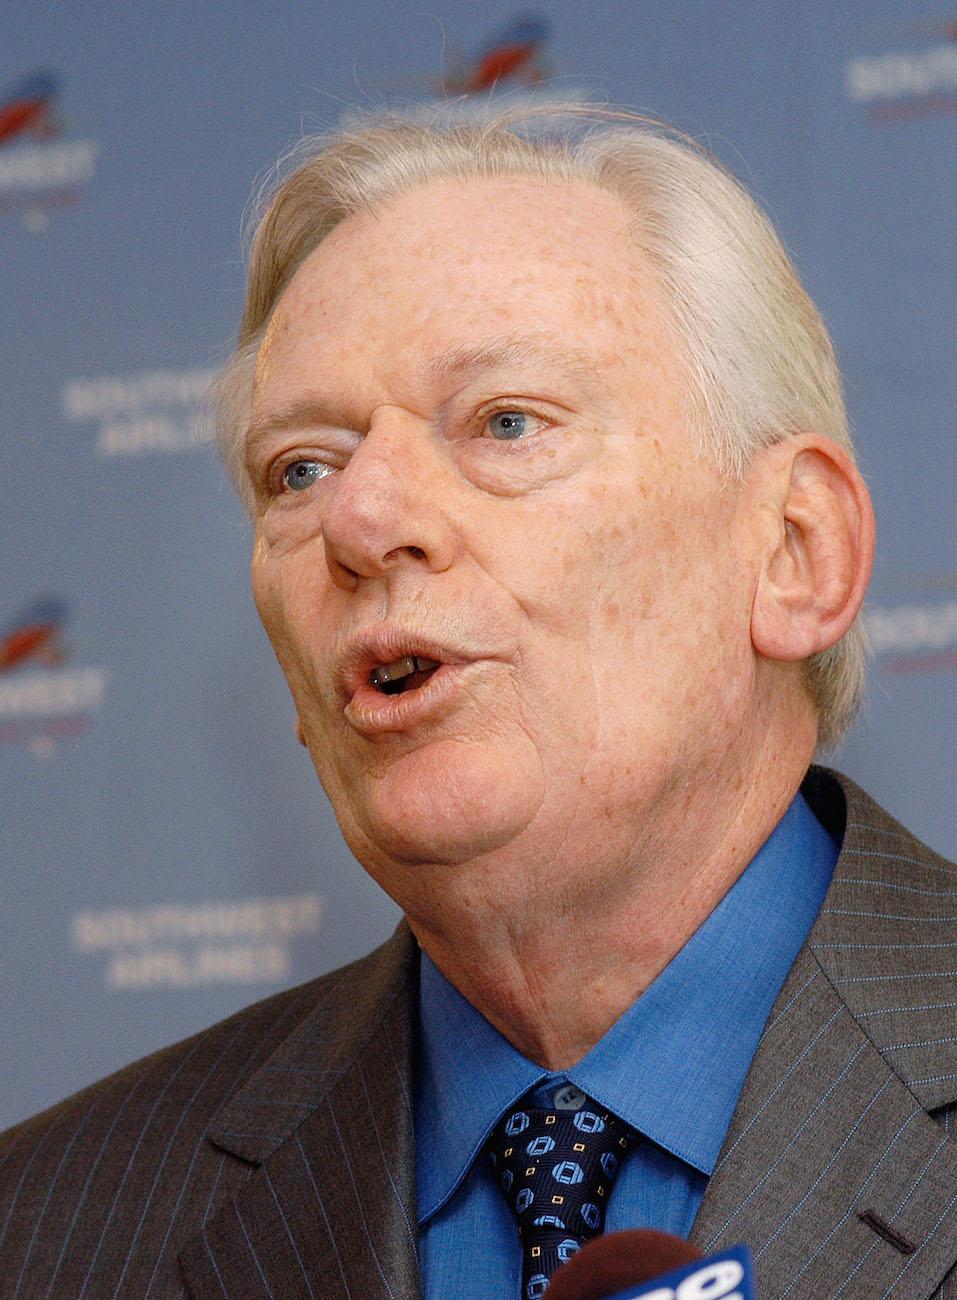 Southwest Airlines Chairman Herb Kelleher at Philadelphia International Airport May 10, 2004. (William Thomas Cain/Getty Images)